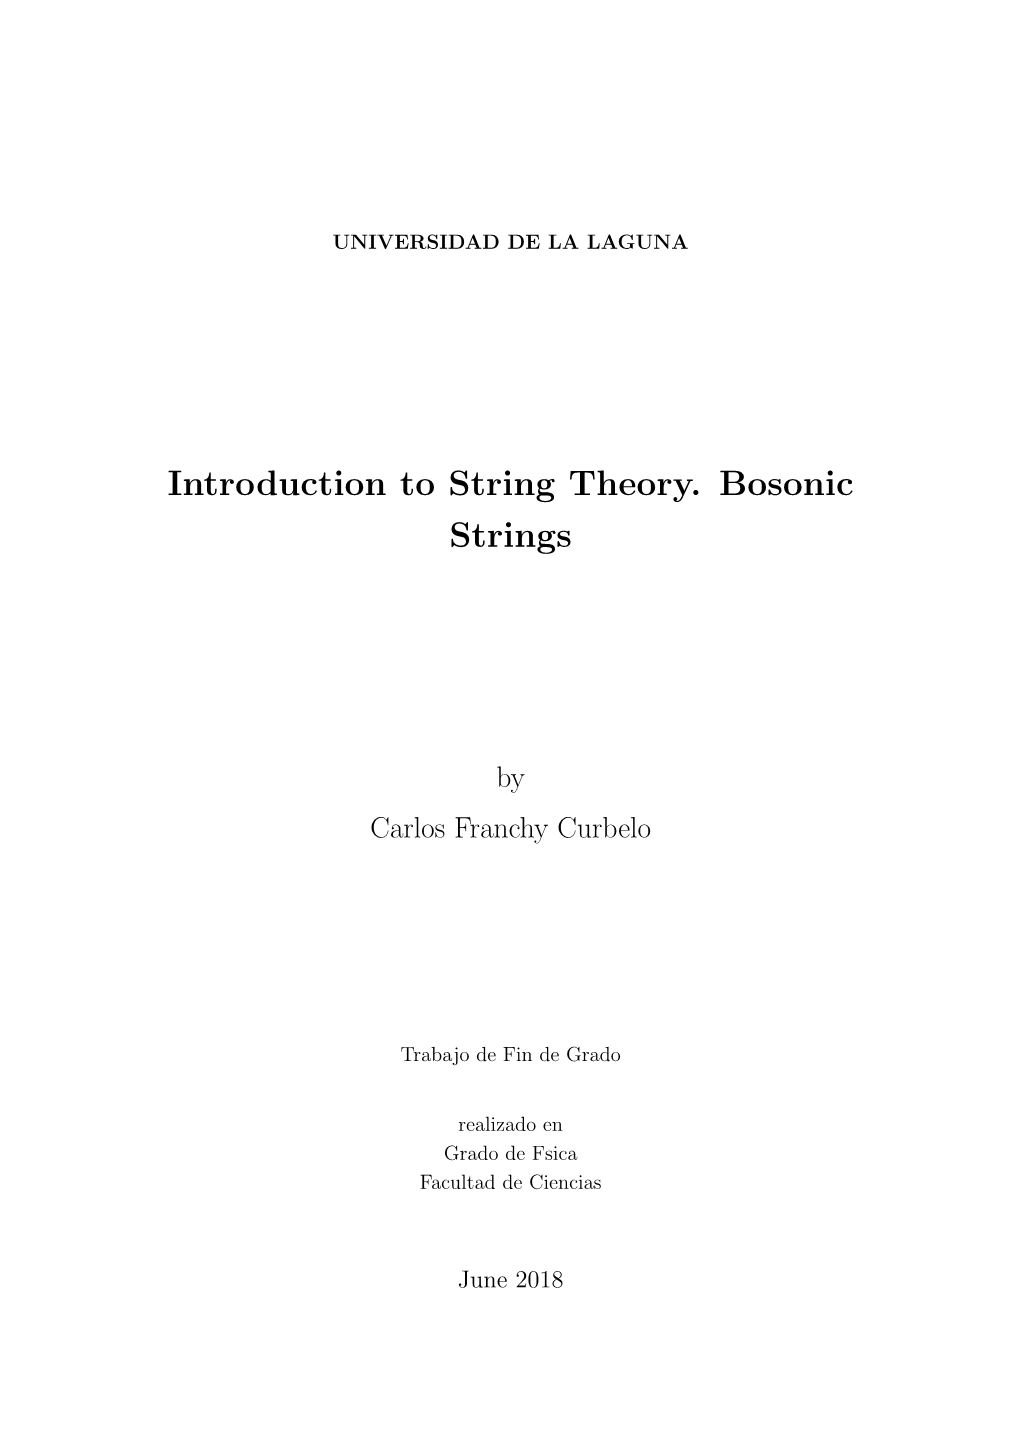 Introduction to String Theory. Bosonic Strings